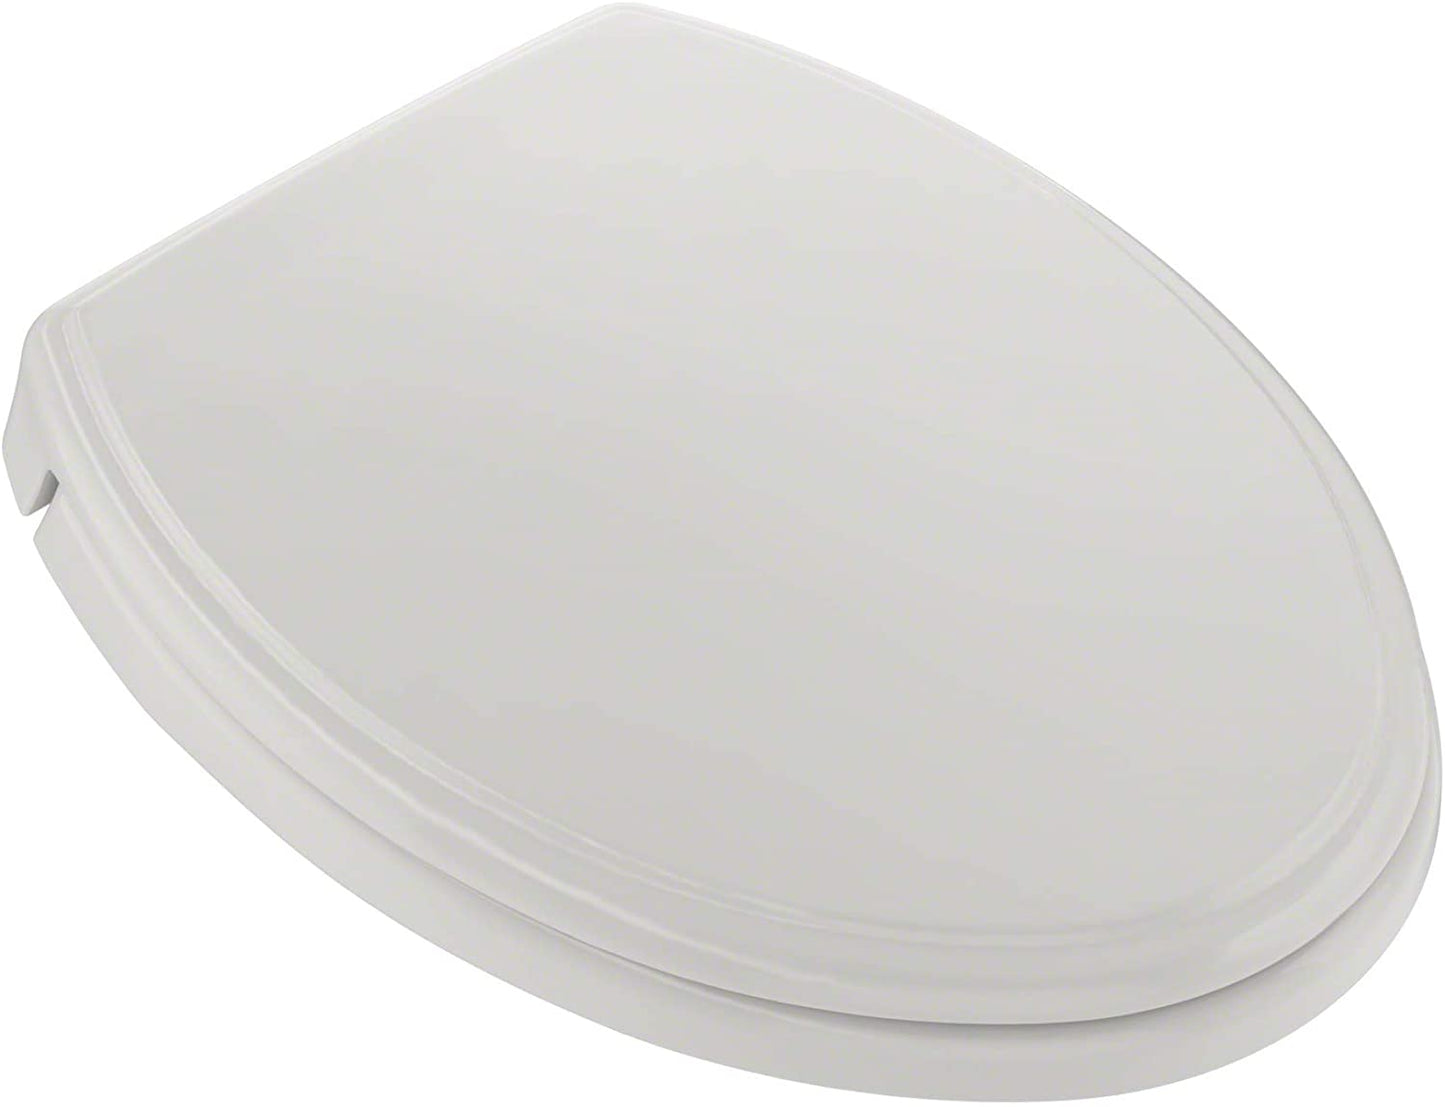 SS154#11 - Traditional SoftClose Elongated Toilet Seat - Colonial White